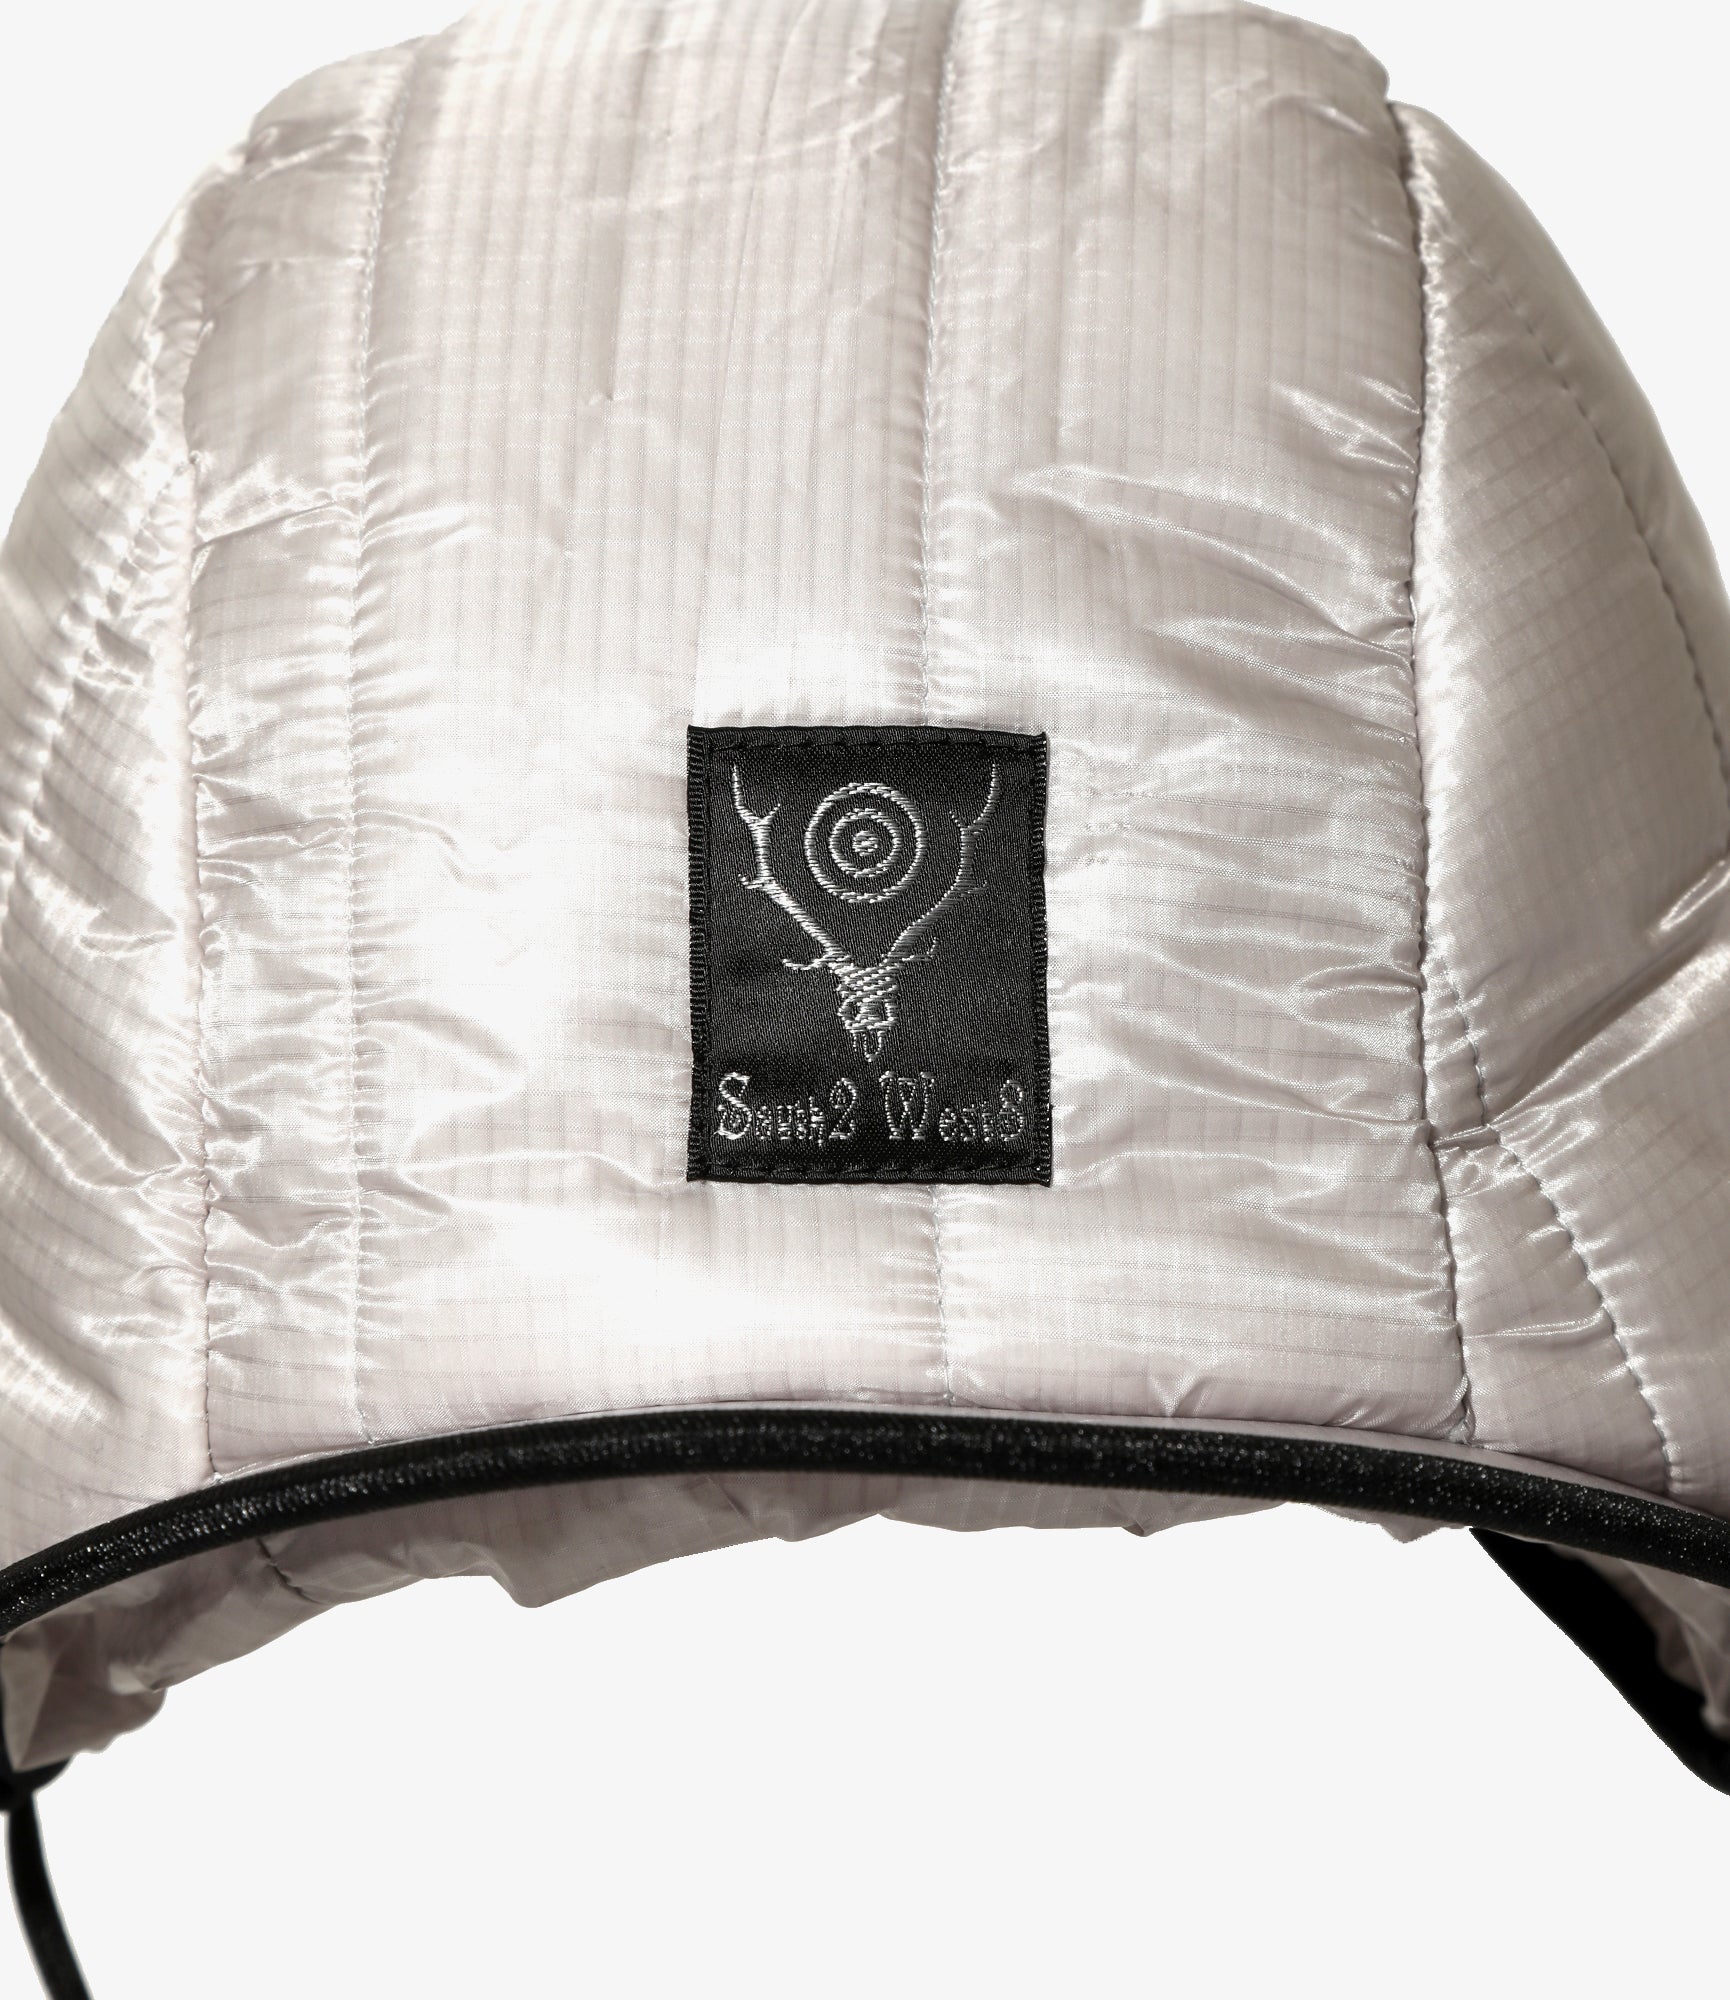 South2 West8 Quilted Cap - Nylon Ripstop - Grey